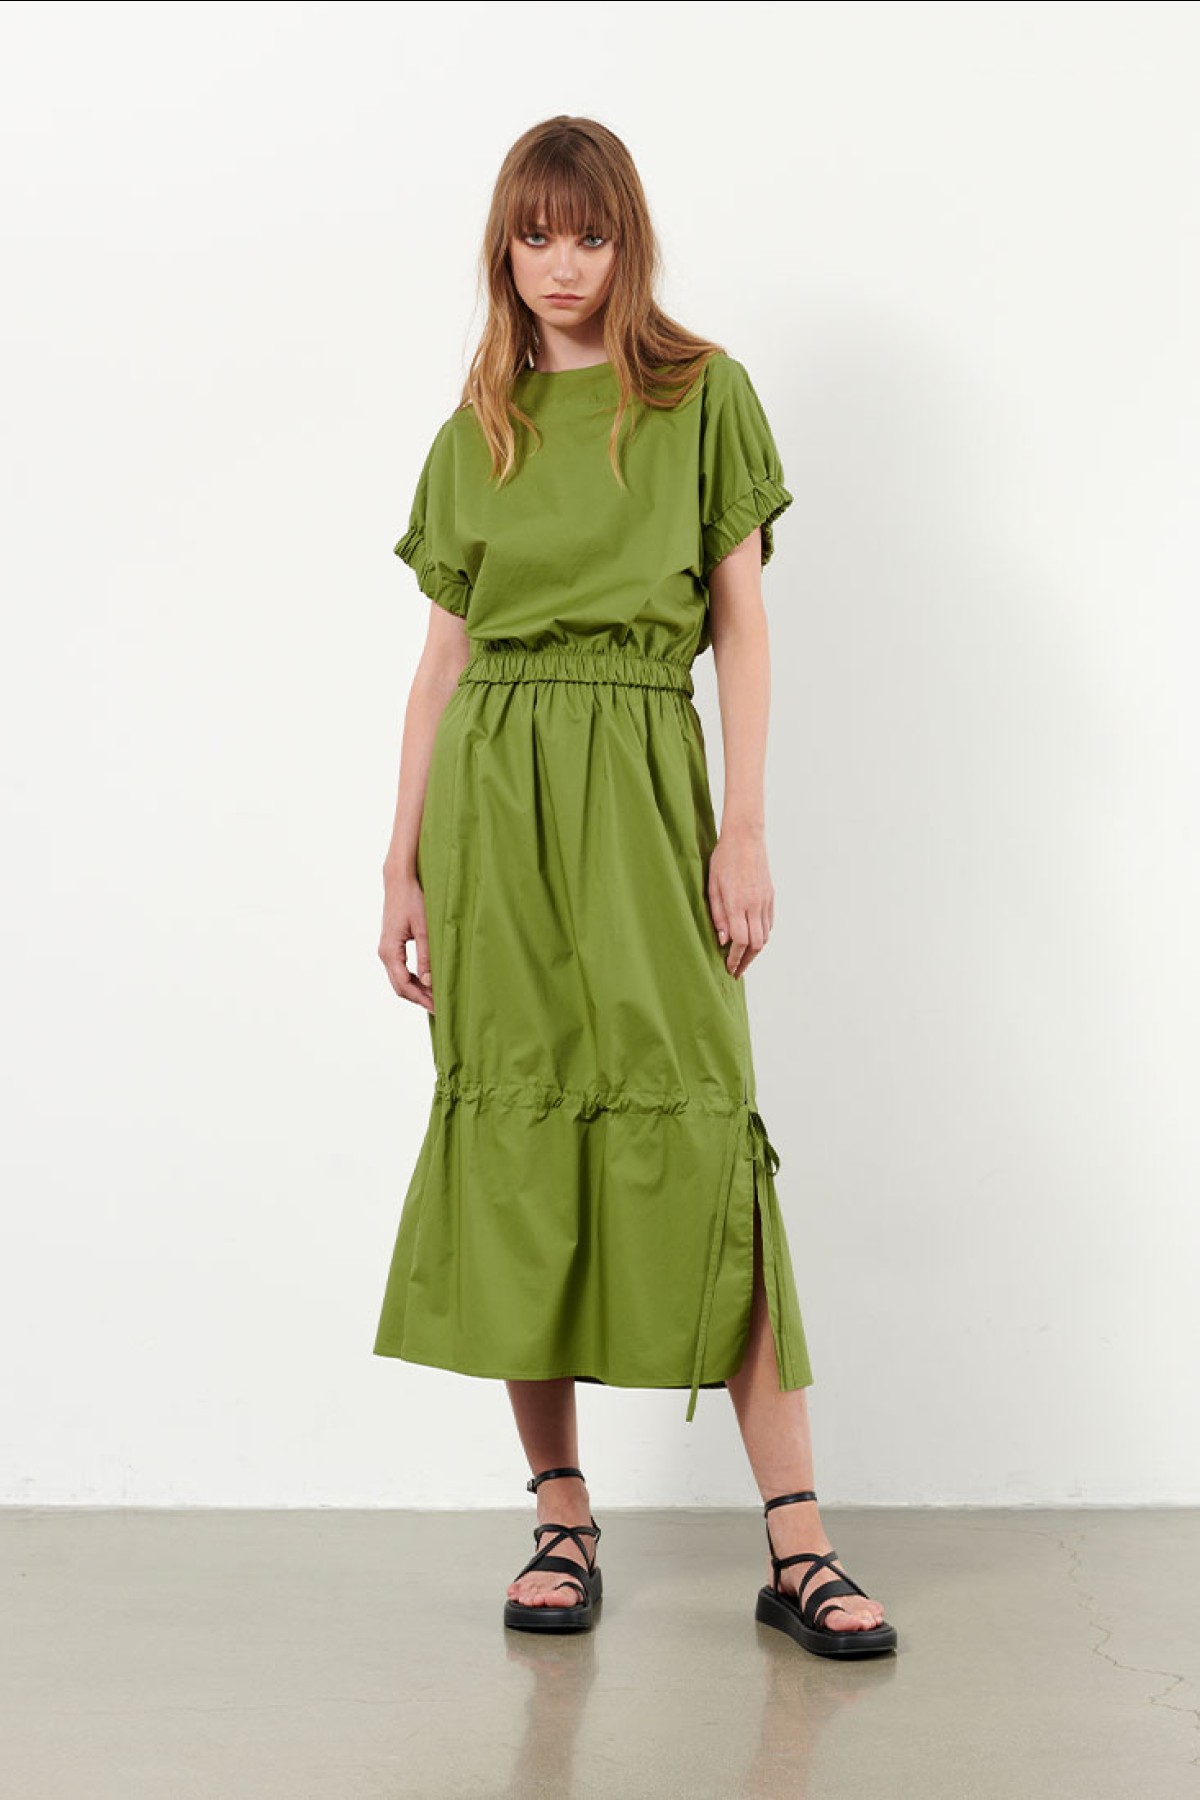 TOP - TWO COLORS, GREEN & BEIGE